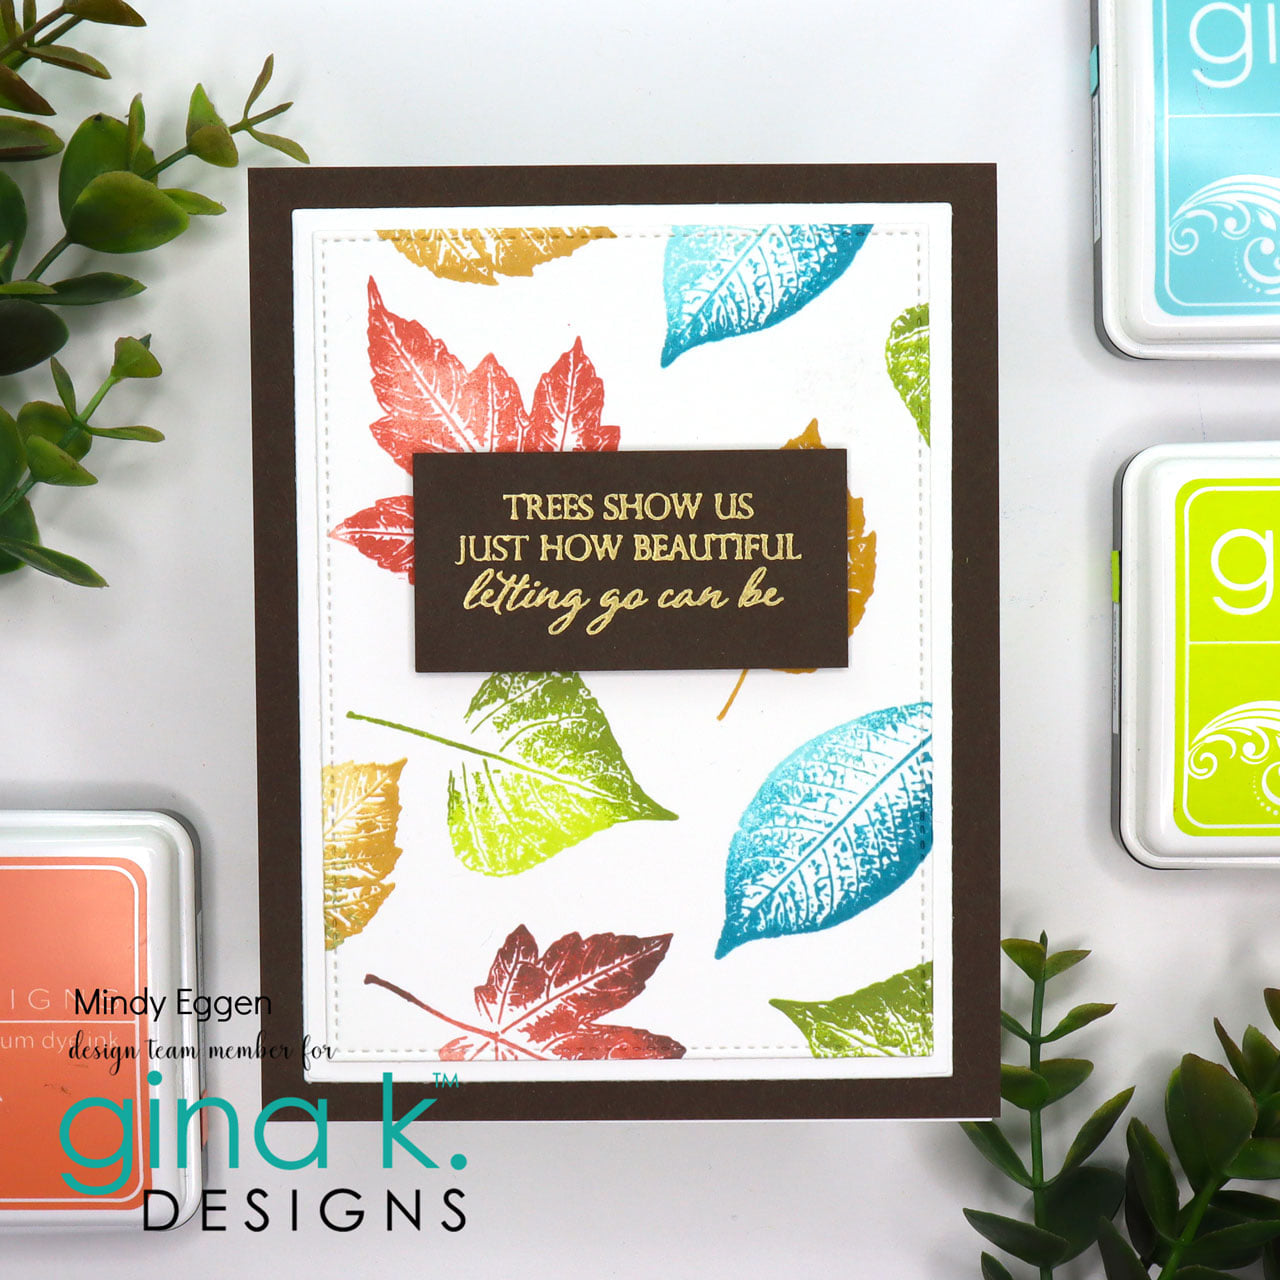 A basket full of fall goodness from Gina K. Designs! The new kit is here! -  CZ Design